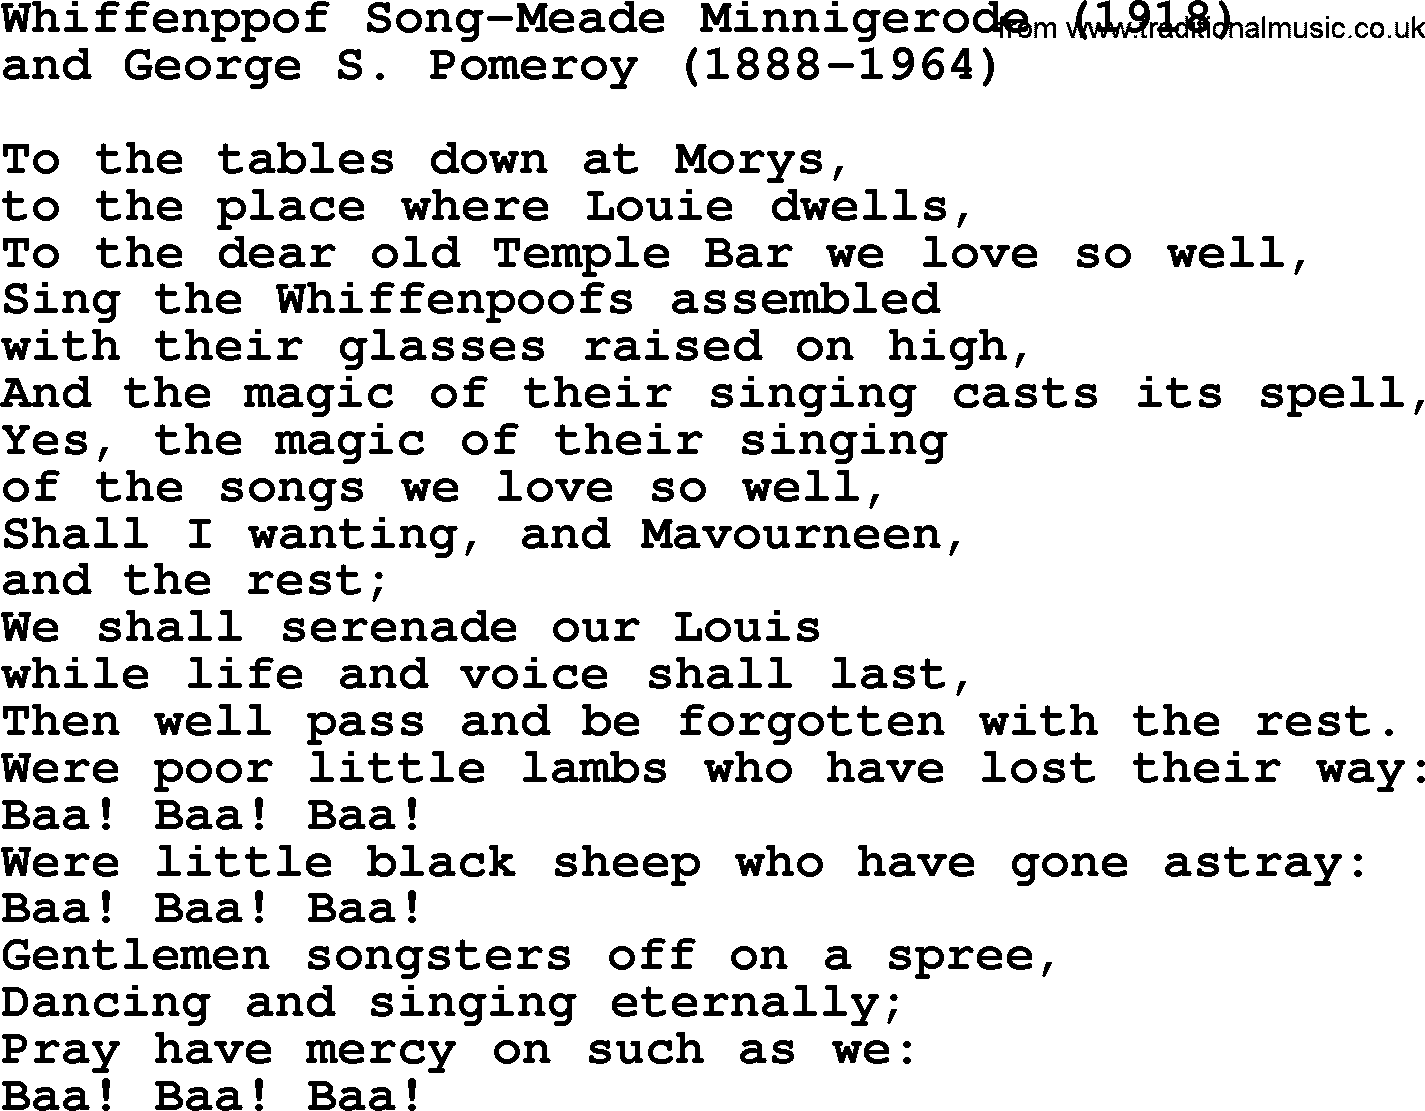 World War(WW1) One Song: Whiffenppof Song-Meade Minnigerode 1918, lyrics and PDF